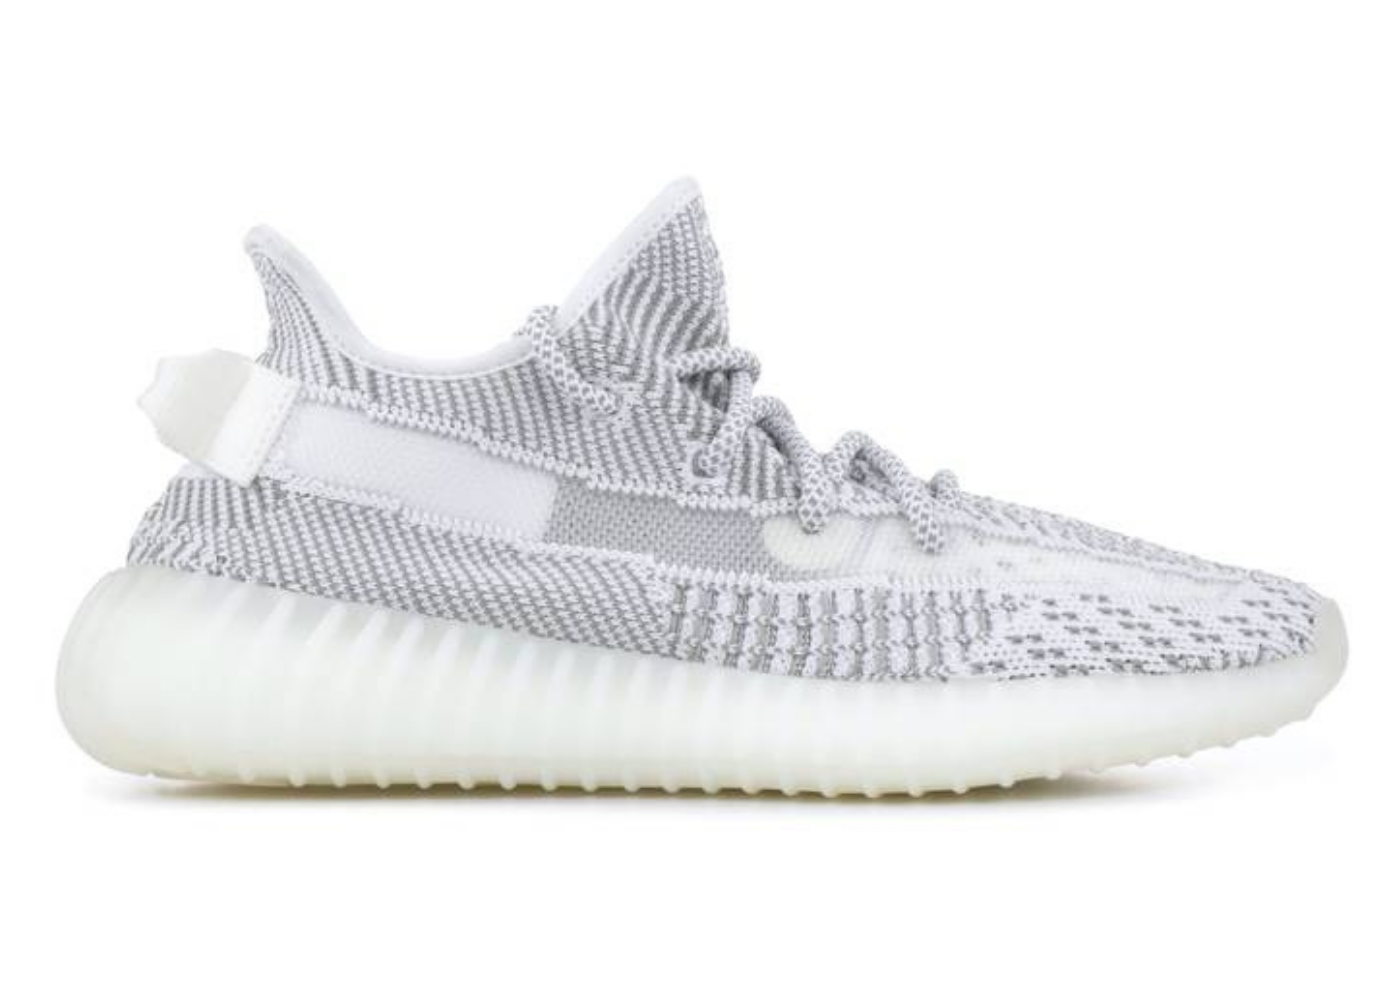 yeezy boost 350 v2 static non reflective